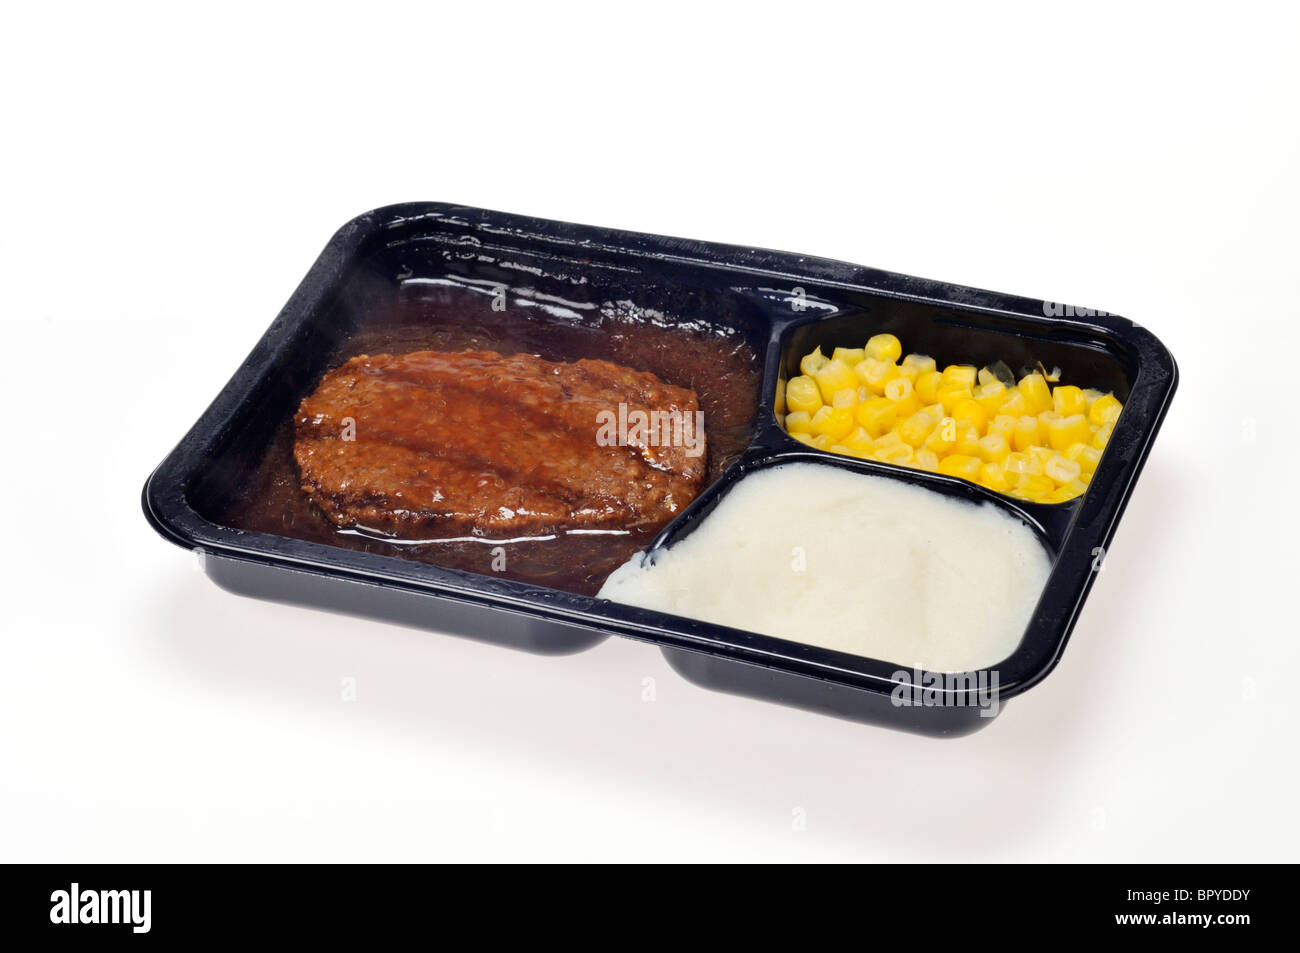 A cooked microwaved tv dinner, ready meal of salisbury steak, corn and mashed potatoes with gravy on white background, cutout. Stock Photo